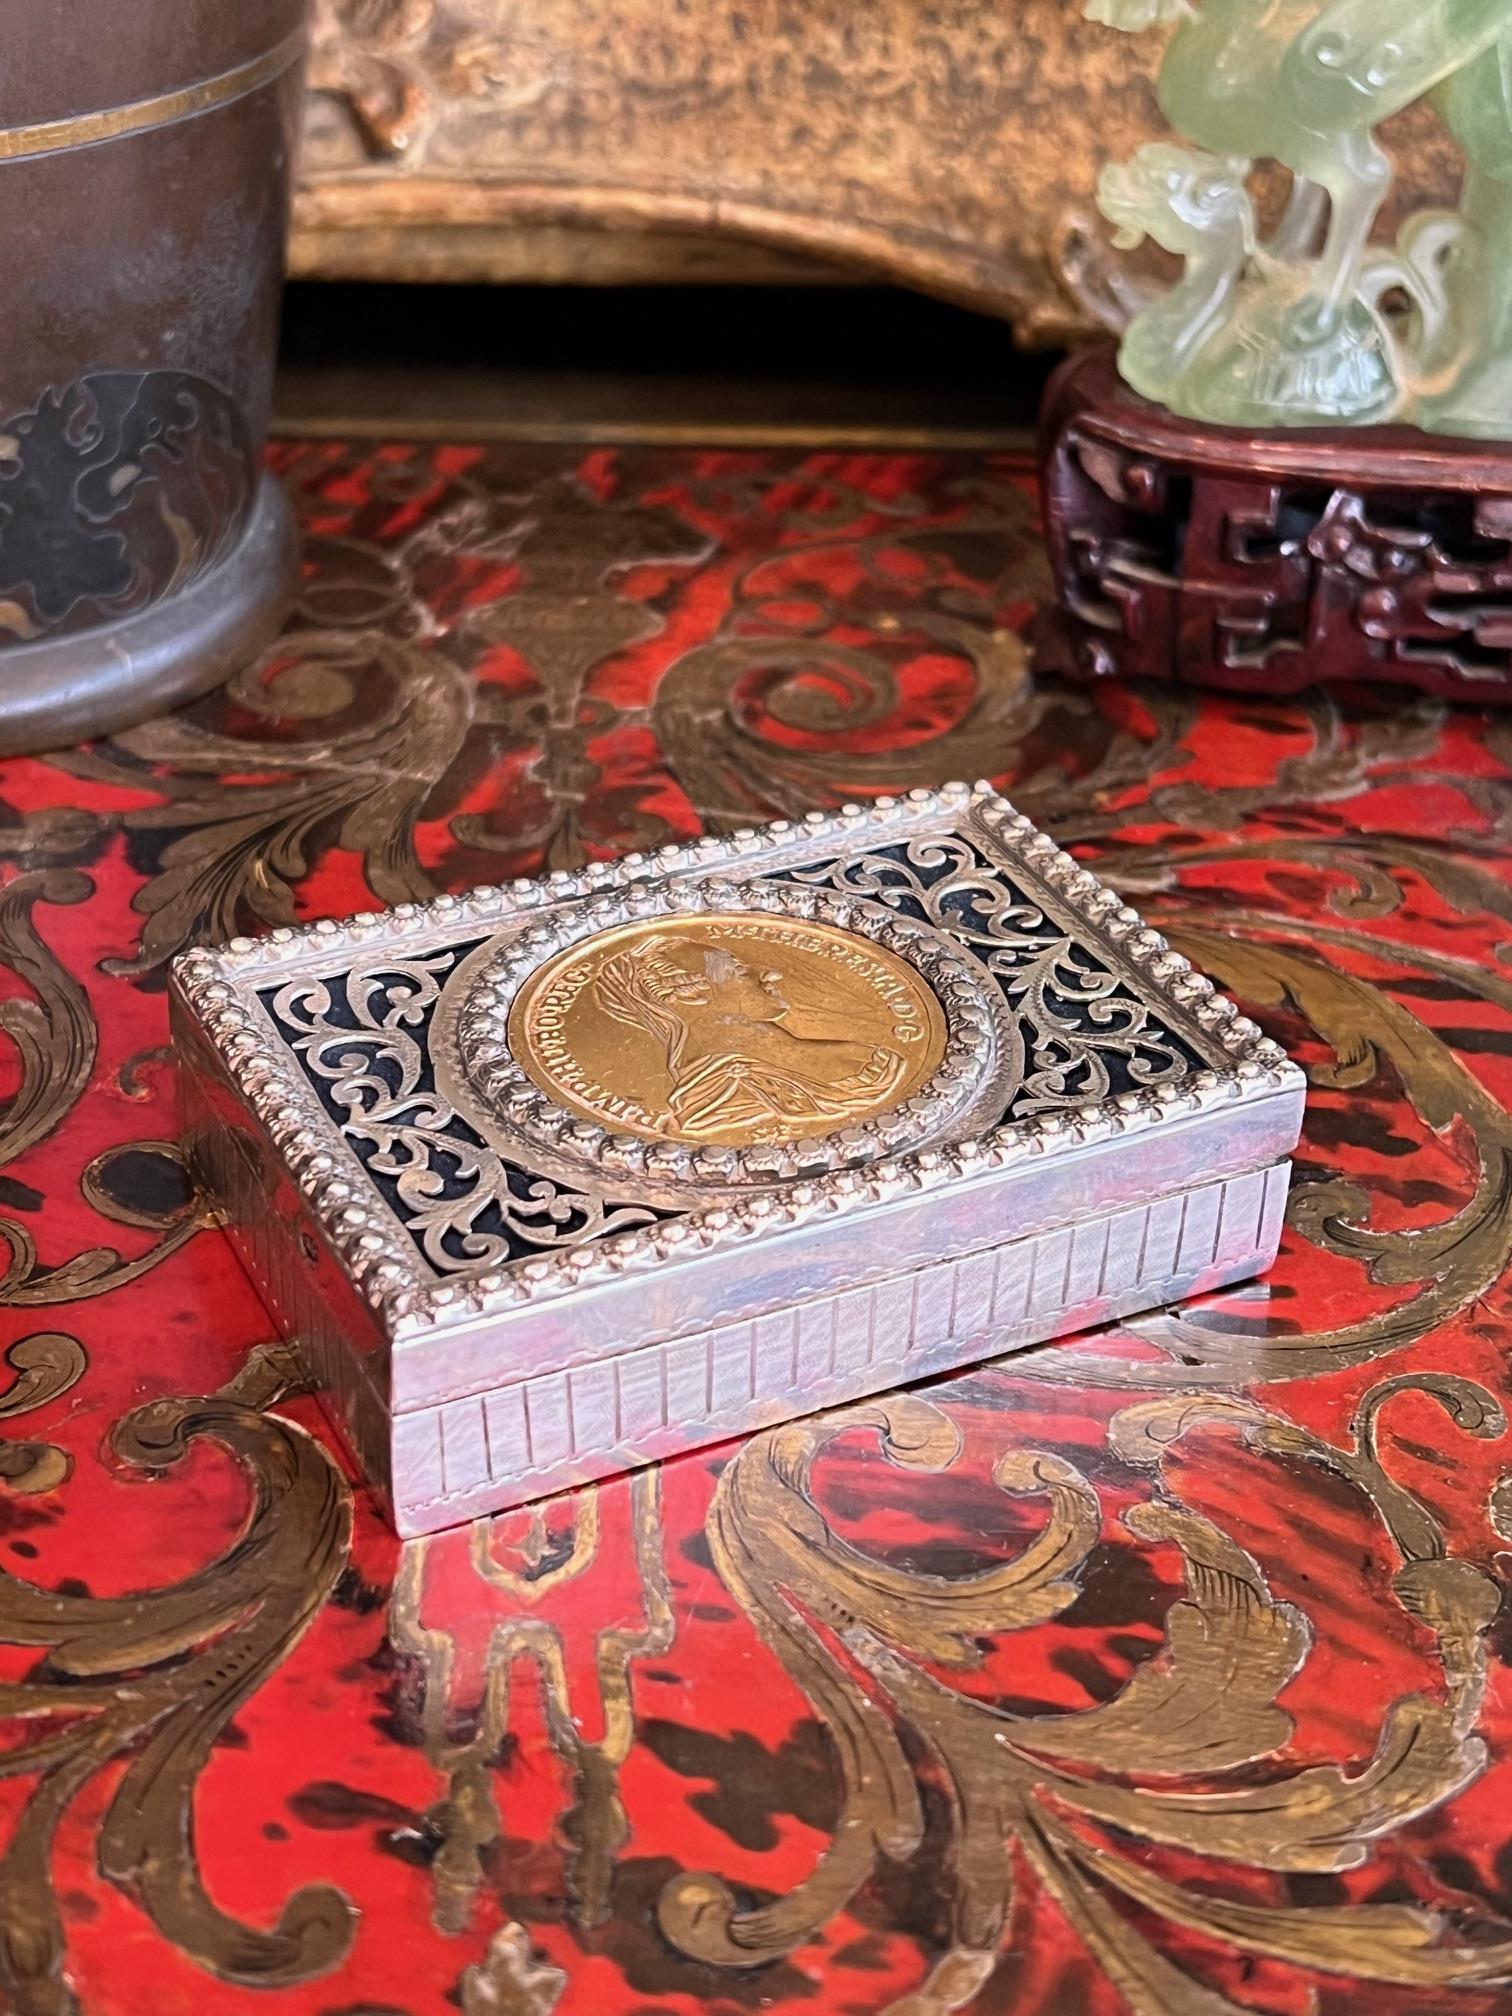 A RUSSIAN SILVER SNUFF BOX INLAID WITH A MARIA THERESA COIN